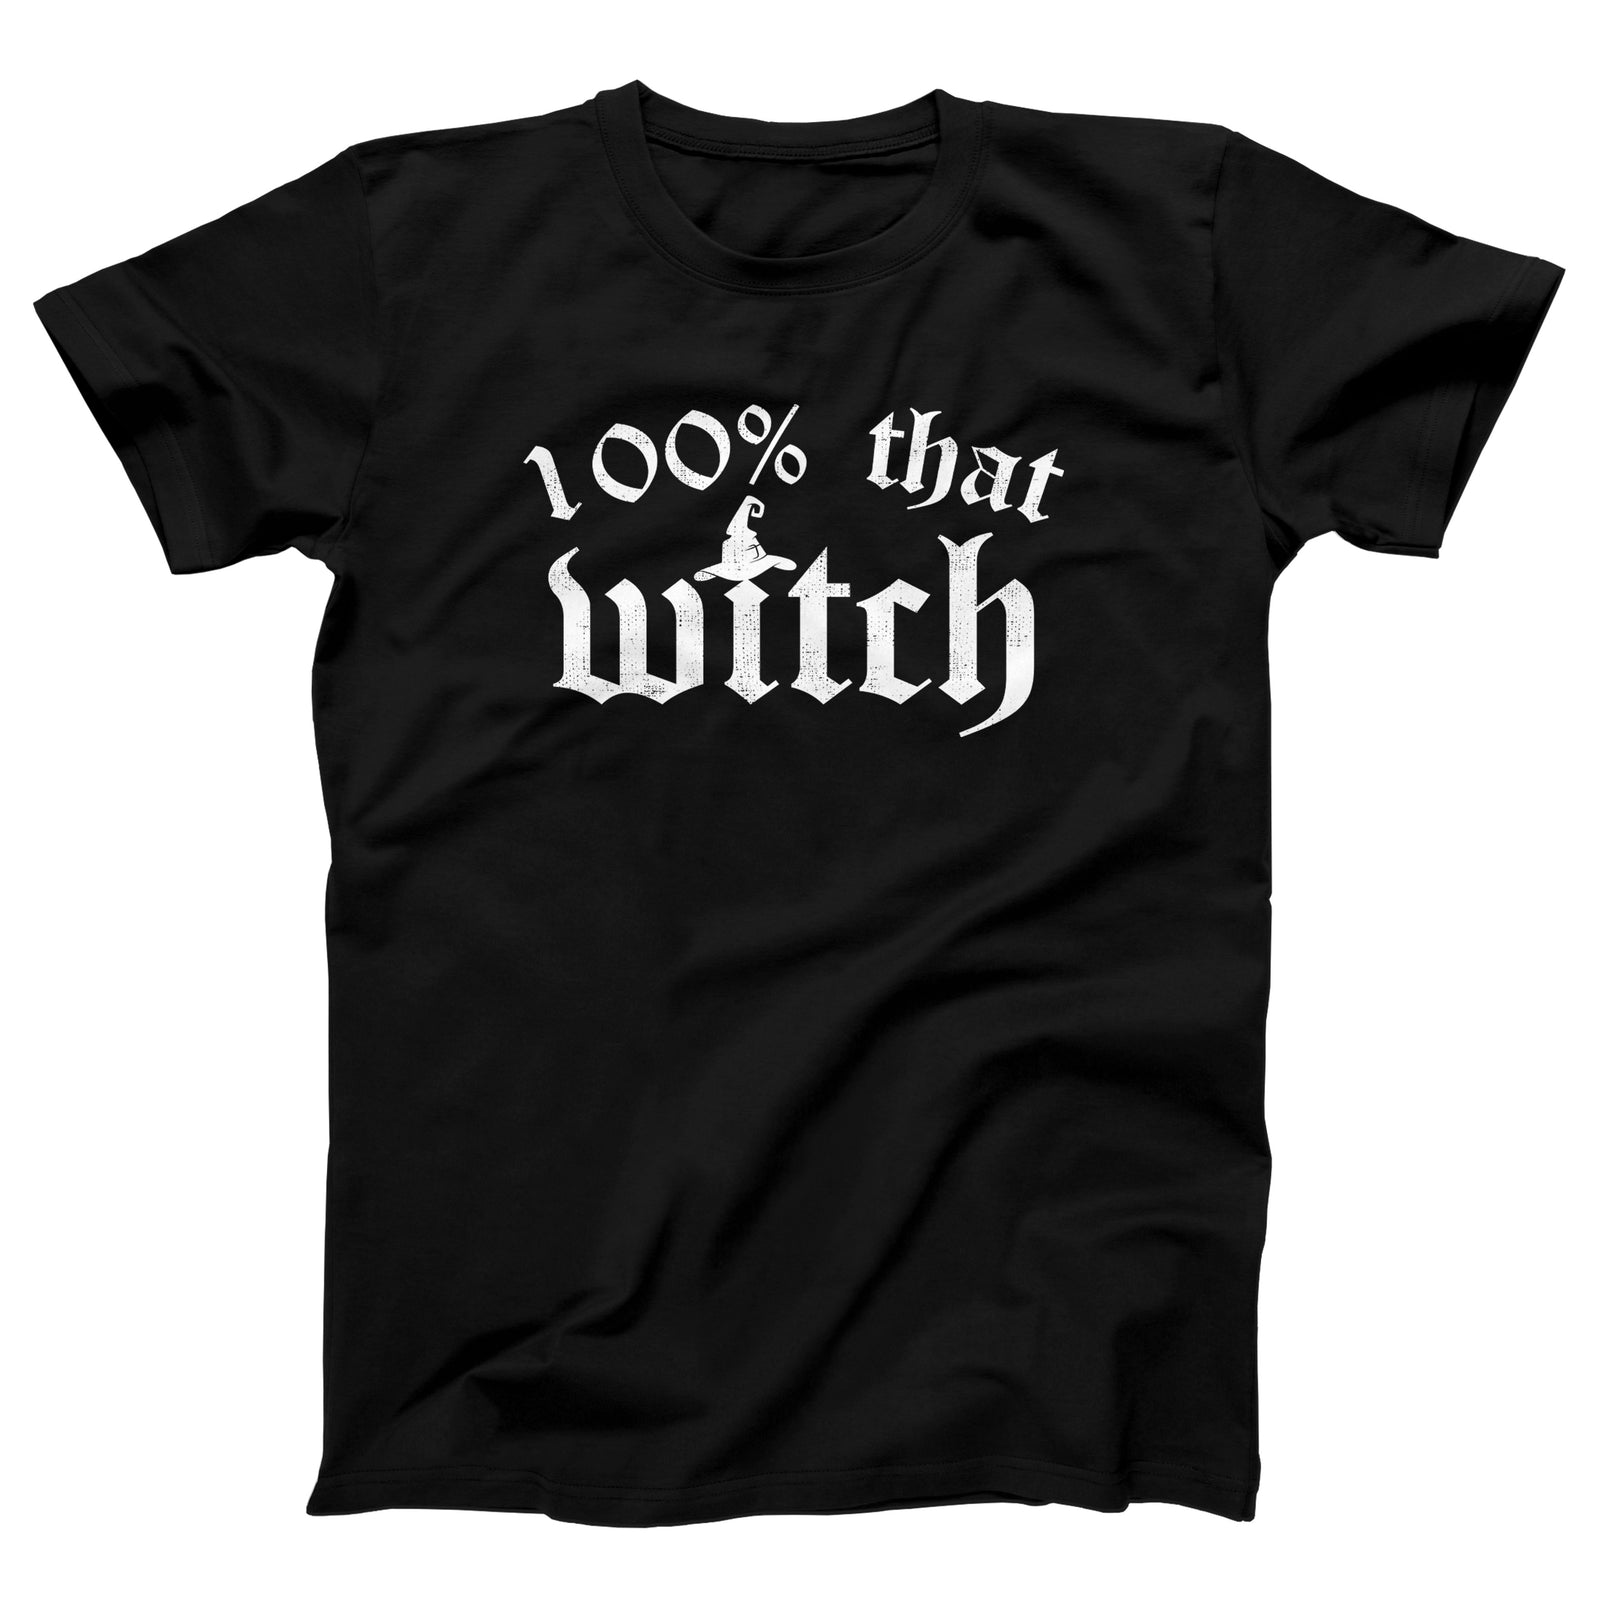 //cdn.shopify.com/s/files/1/0274/2488/2766/products/100-that-witch-menunisex-t-shirt-690153_5000x.jpg?v=1662710889 5000w,
    //cdn.shopify.com/s/files/1/0274/2488/2766/products/100-that-witch-menunisex-t-shirt-690153_4500x.jpg?v=1662710889 4500w,
    //cdn.shopify.com/s/files/1/0274/2488/2766/products/100-that-witch-menunisex-t-shirt-690153_4000x.jpg?v=1662710889 4000w,
    //cdn.shopify.com/s/files/1/0274/2488/2766/products/100-that-witch-menunisex-t-shirt-690153_3500x.jpg?v=1662710889 3500w,
    //cdn.shopify.com/s/files/1/0274/2488/2766/products/100-that-witch-menunisex-t-shirt-690153_3000x.jpg?v=1662710889 3000w,
    //cdn.shopify.com/s/files/1/0274/2488/2766/products/100-that-witch-menunisex-t-shirt-690153_2500x.jpg?v=1662710889 2500w,
    //cdn.shopify.com/s/files/1/0274/2488/2766/products/100-that-witch-menunisex-t-shirt-690153_2000x.jpg?v=1662710889 2000w,
    //cdn.shopify.com/s/files/1/0274/2488/2766/products/100-that-witch-menunisex-t-shirt-690153_1800x.jpg?v=1662710889 1800w,
    //cdn.shopify.com/s/files/1/0274/2488/2766/products/100-that-witch-menunisex-t-shirt-690153_1600x.jpg?v=1662710889 1600w,
    //cdn.shopify.com/s/files/1/0274/2488/2766/products/100-that-witch-menunisex-t-shirt-690153_1400x.jpg?v=1662710889 1400w,
    //cdn.shopify.com/s/files/1/0274/2488/2766/products/100-that-witch-menunisex-t-shirt-690153_1200x.jpg?v=1662710889 1200w,
    //cdn.shopify.com/s/files/1/0274/2488/2766/products/100-that-witch-menunisex-t-shirt-690153_1000x.jpg?v=1662710889 1000w,
    //cdn.shopify.com/s/files/1/0274/2488/2766/products/100-that-witch-menunisex-t-shirt-690153_800x.jpg?v=1662710889 800w,
    //cdn.shopify.com/s/files/1/0274/2488/2766/products/100-that-witch-menunisex-t-shirt-690153_600x.jpg?v=1662710889 600w,
    //cdn.shopify.com/s/files/1/0274/2488/2766/products/100-that-witch-menunisex-t-shirt-690153_400x.jpg?v=1662710889 400w,
    //cdn.shopify.com/s/files/1/0274/2488/2766/products/100-that-witch-menunisex-t-shirt-690153_200x.jpg?v=1662710889 200w